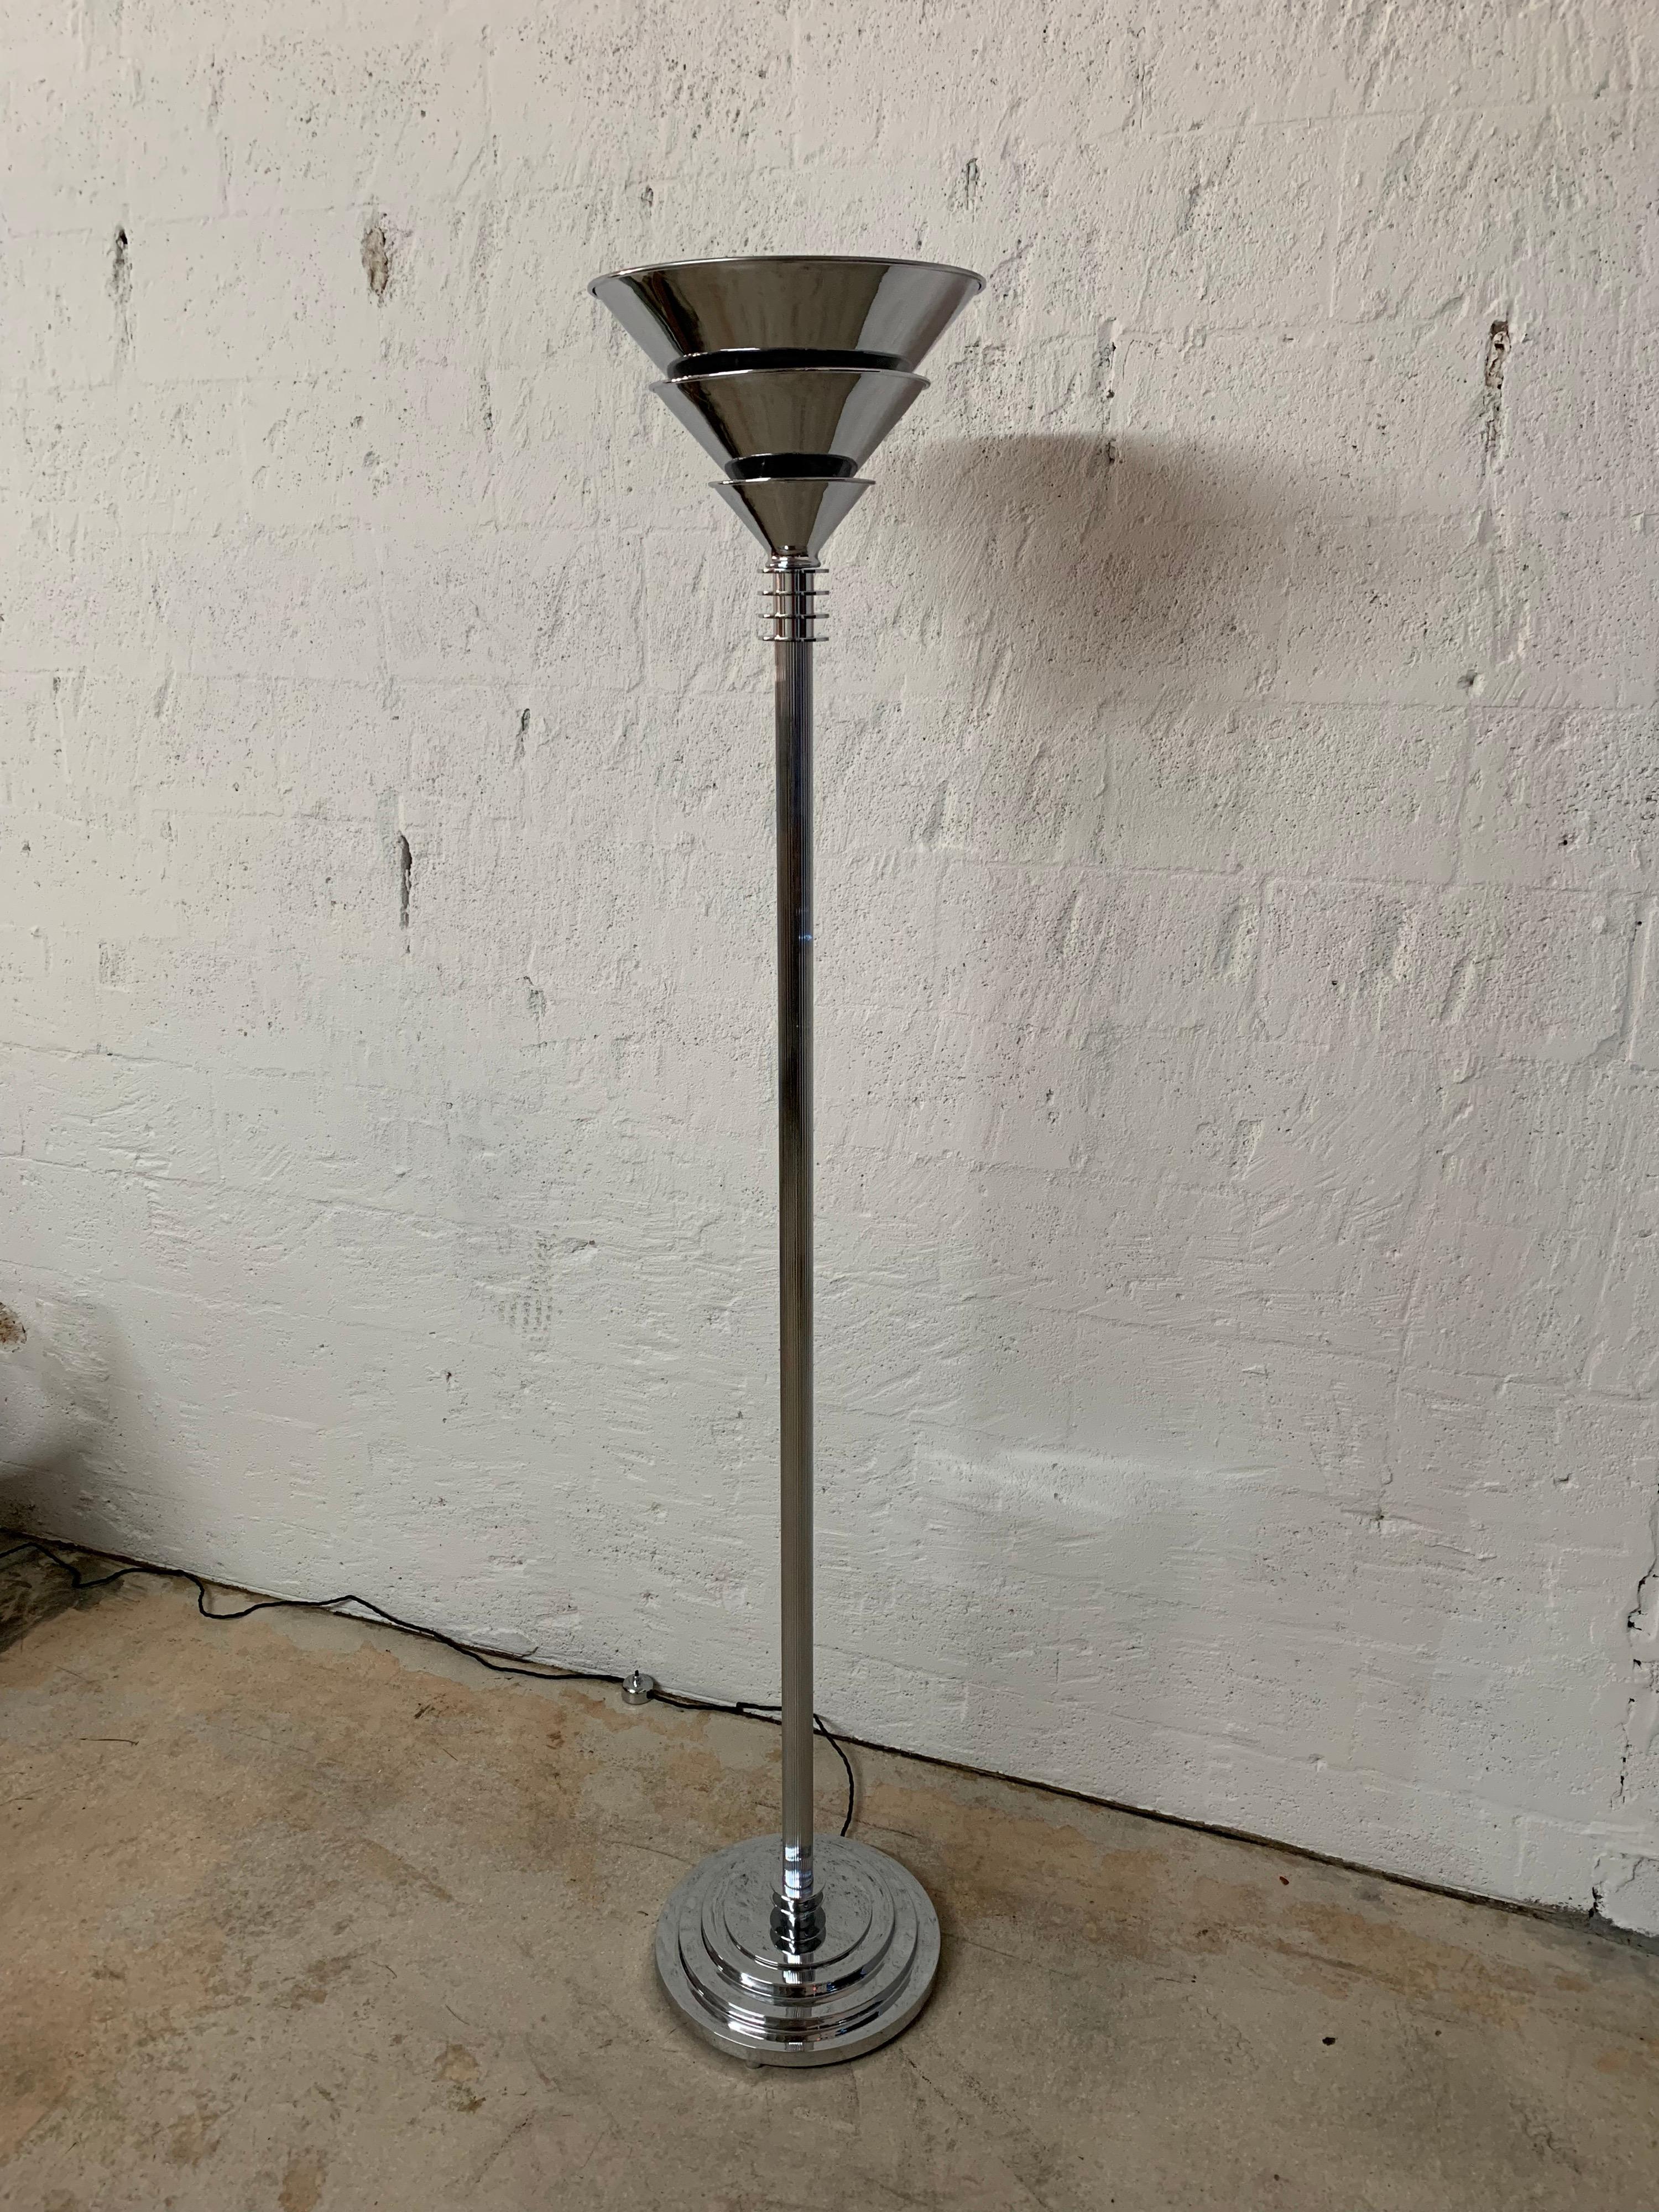 French Art Deco Polished Chrome over Steel Torchiere or Floor Lamp, Jean Perzel Style